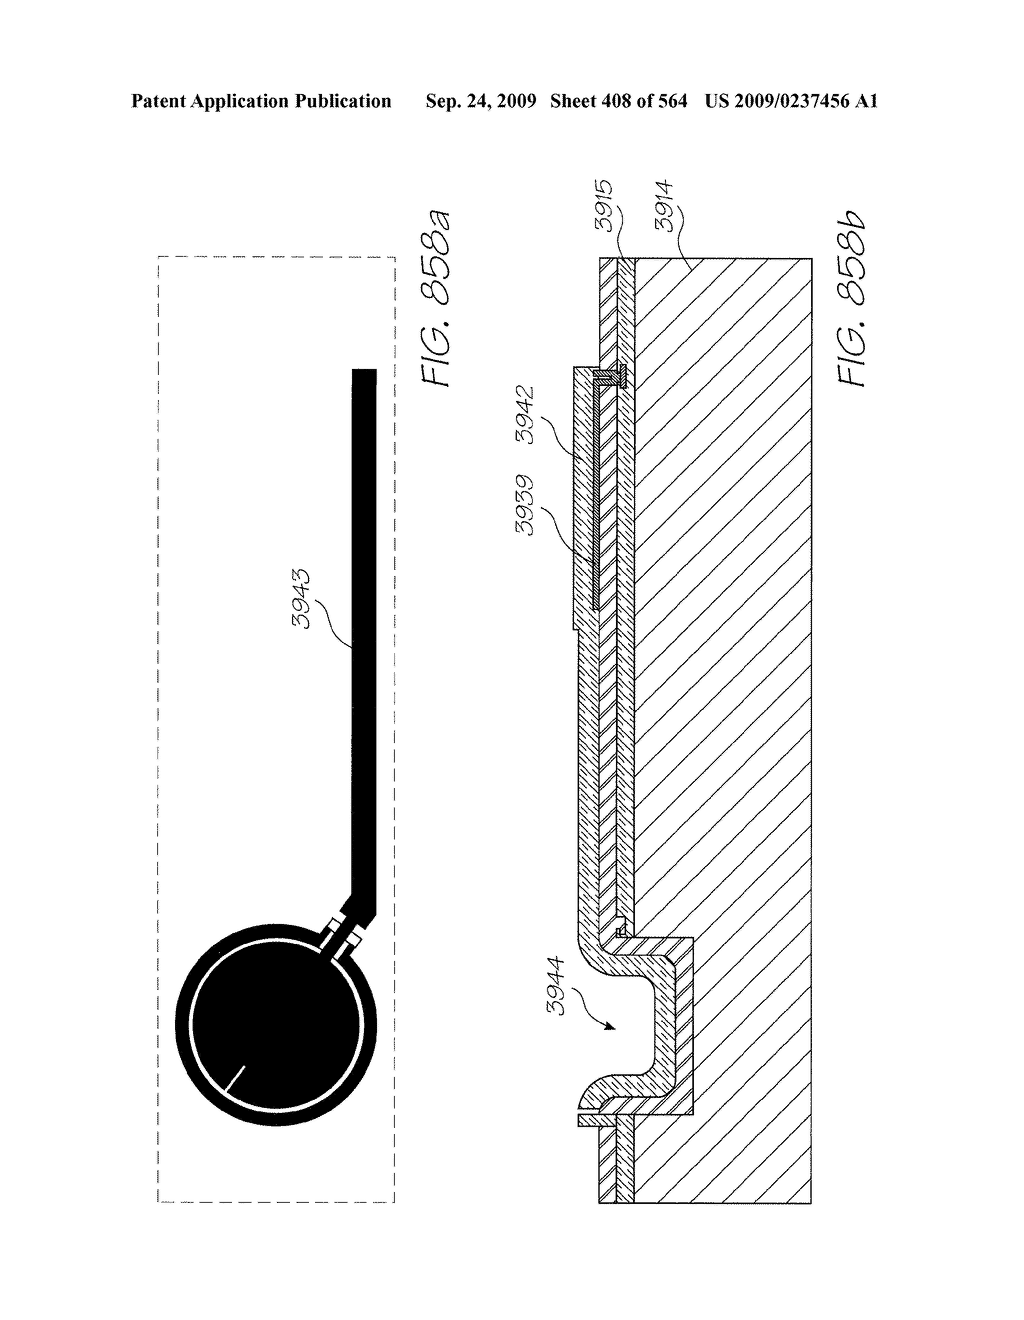 Inkjet Printhead With Paddle For Ejecting Ink From One Of Two Nozzles - diagram, schematic, and image 409